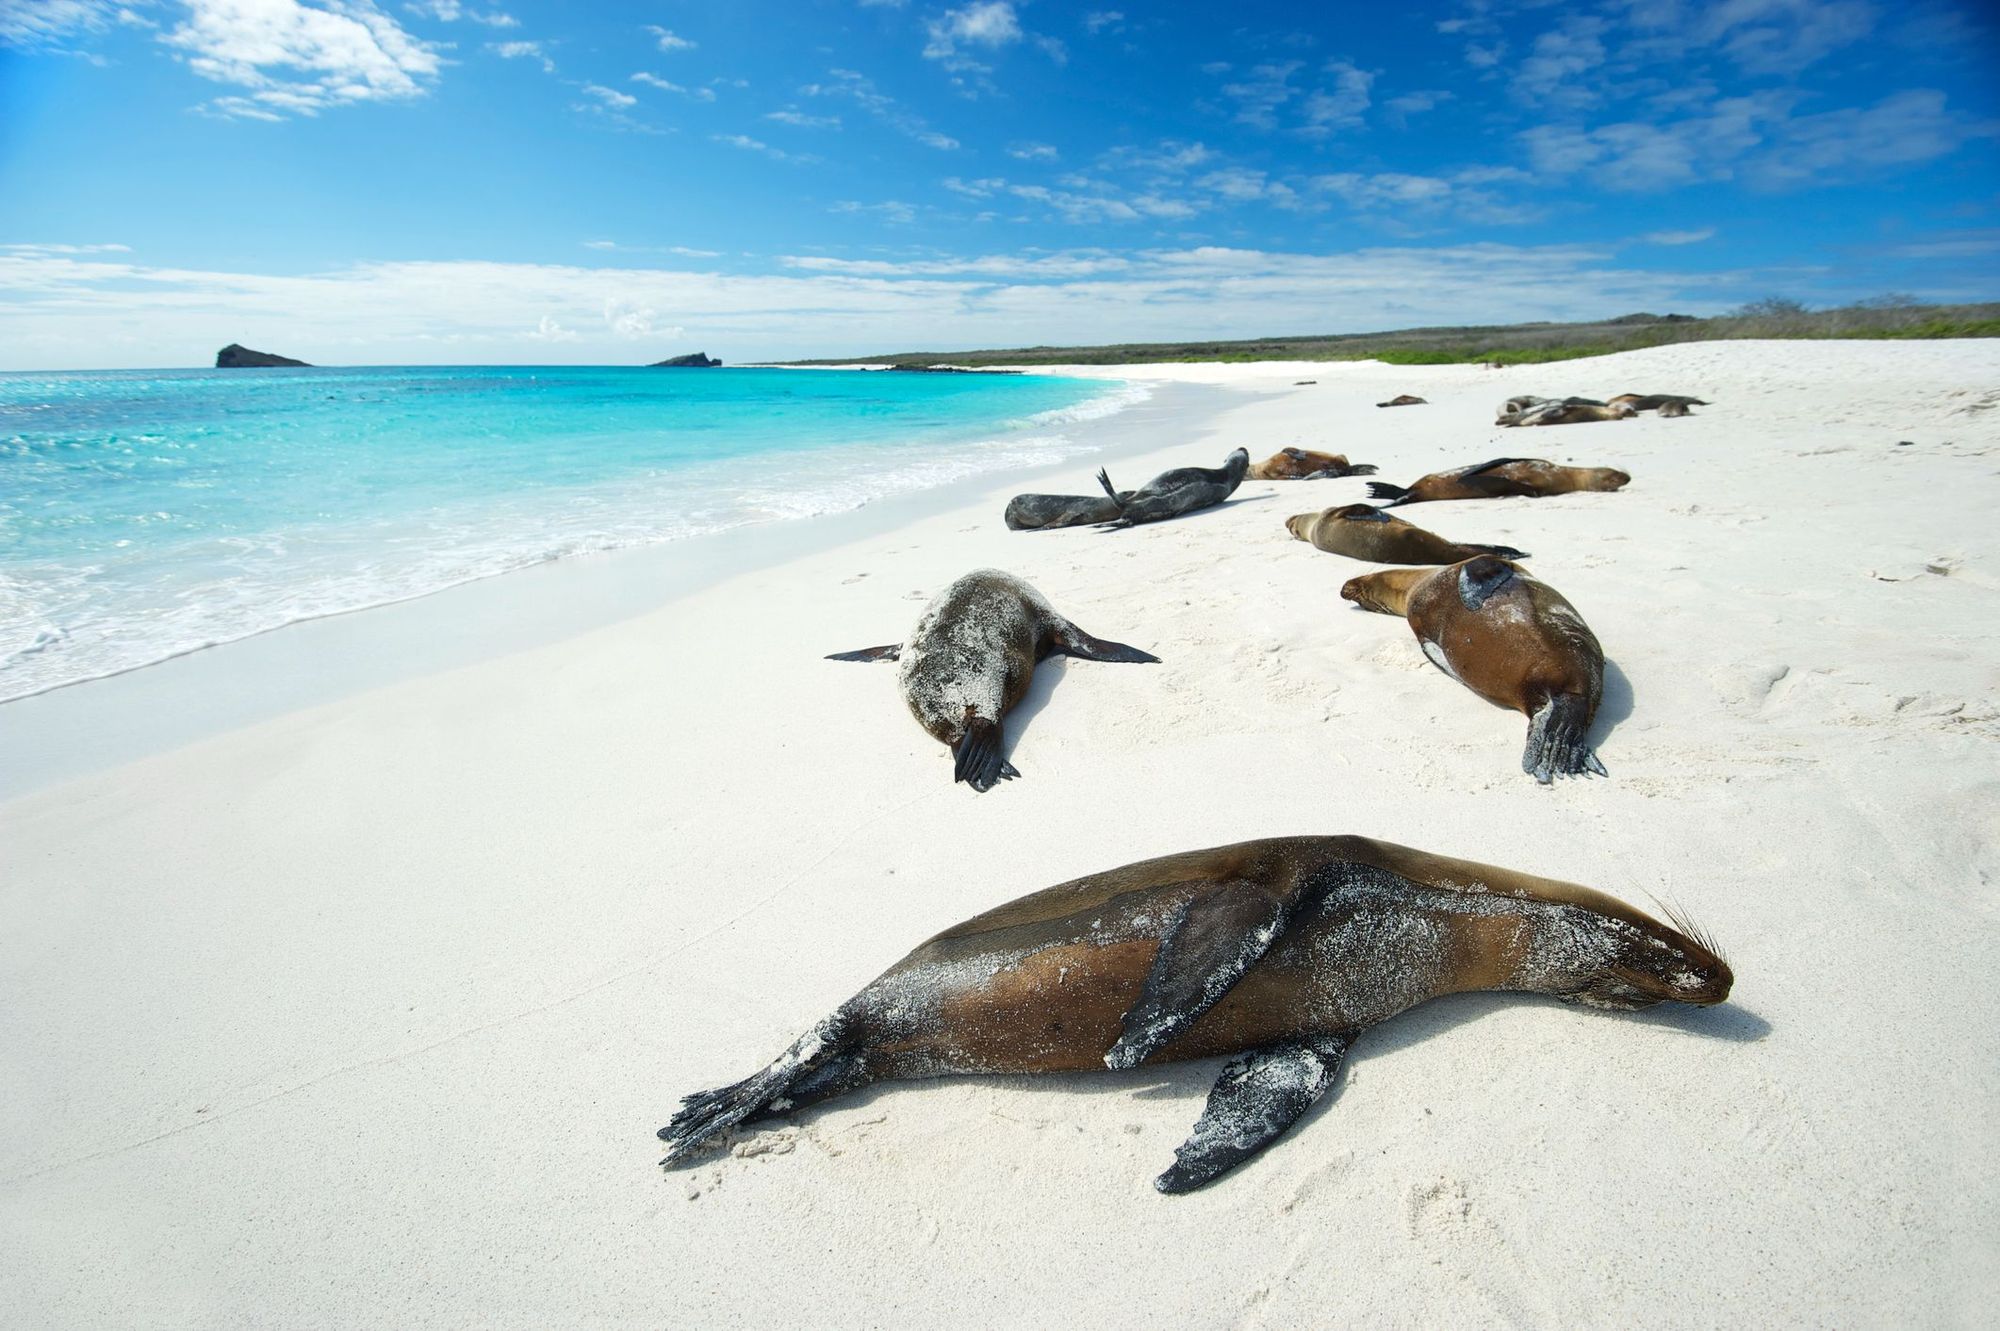 Galapagos sea lions relaxing on the beach. Photo: Getty.